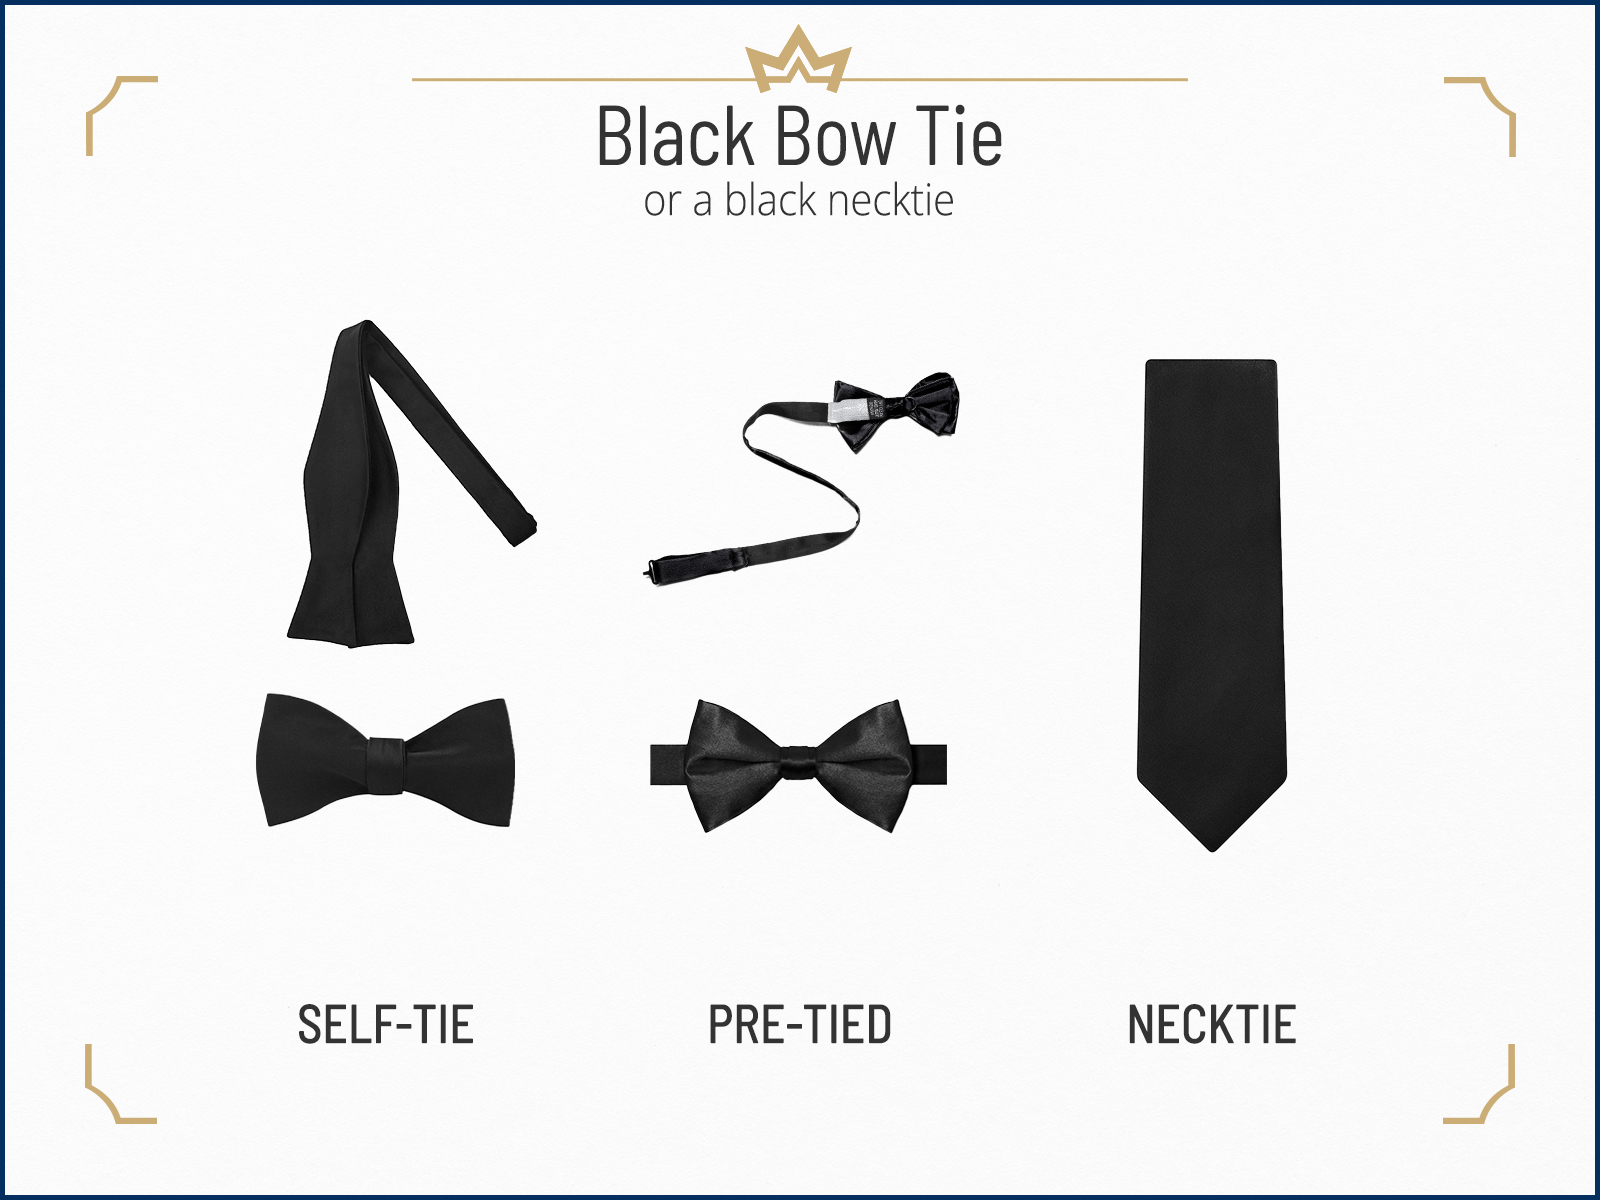 Black bow tie and black tie styles acceptable for black-tie events